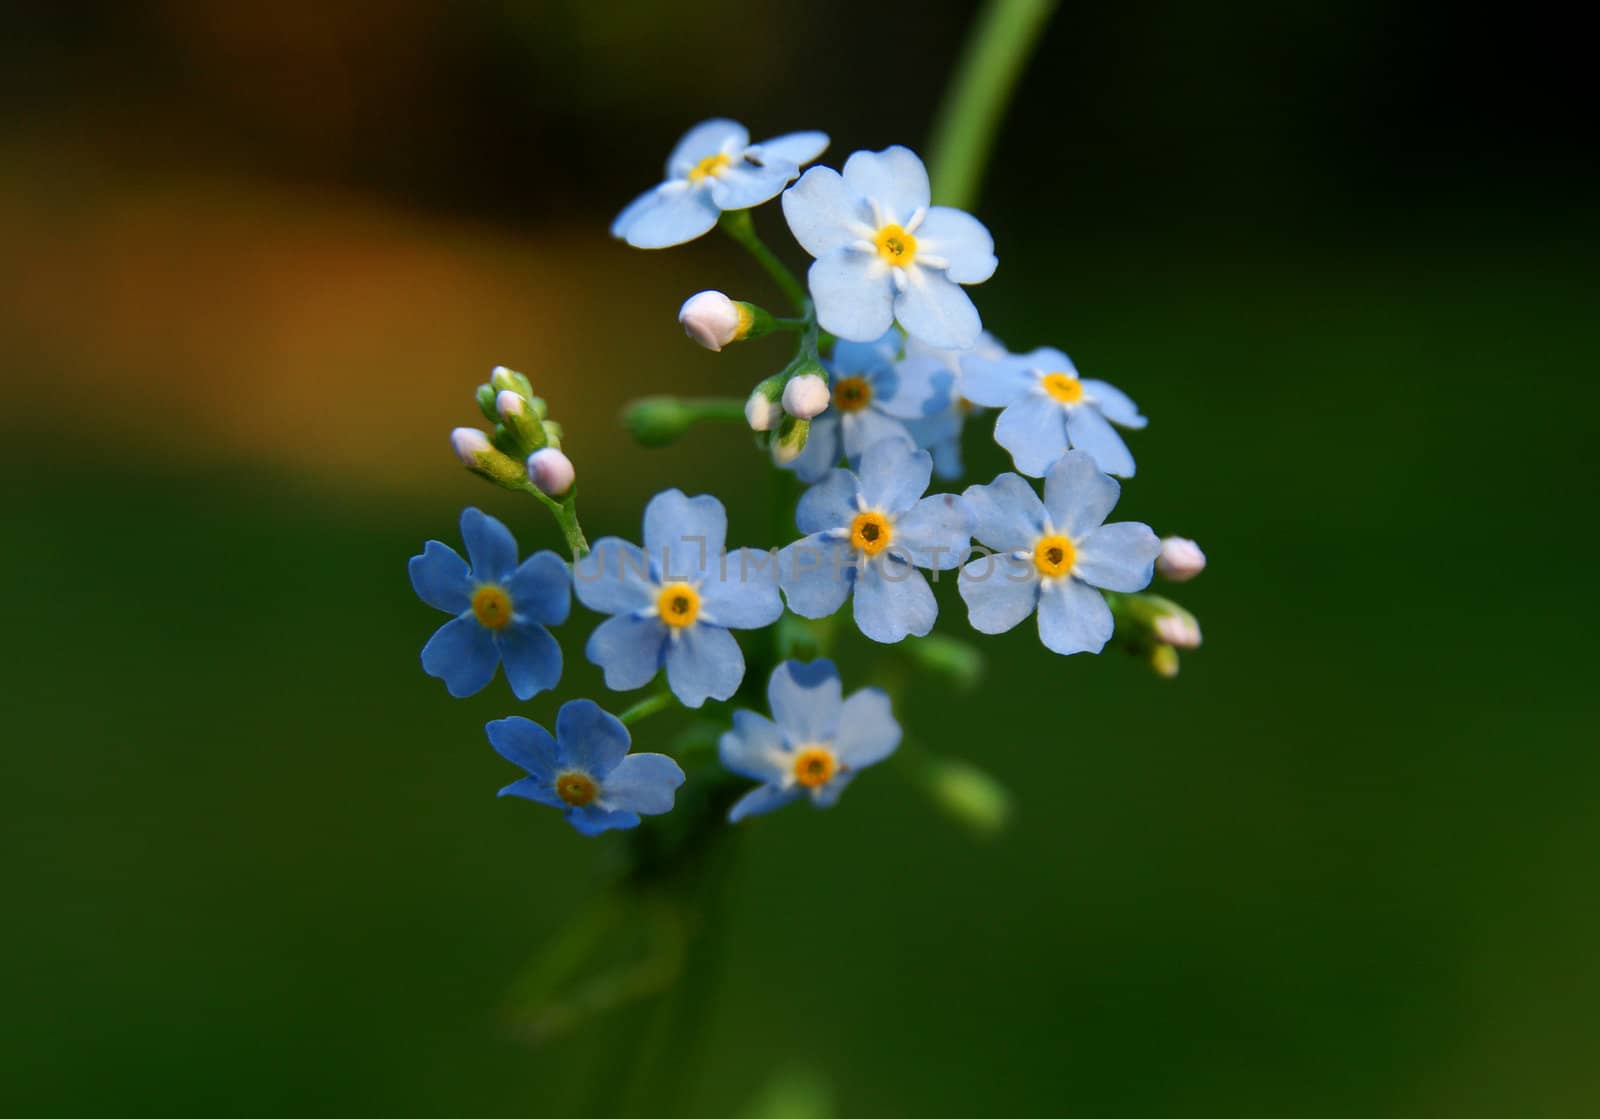 Forget-me-not Beautiful blue field flower,close-up